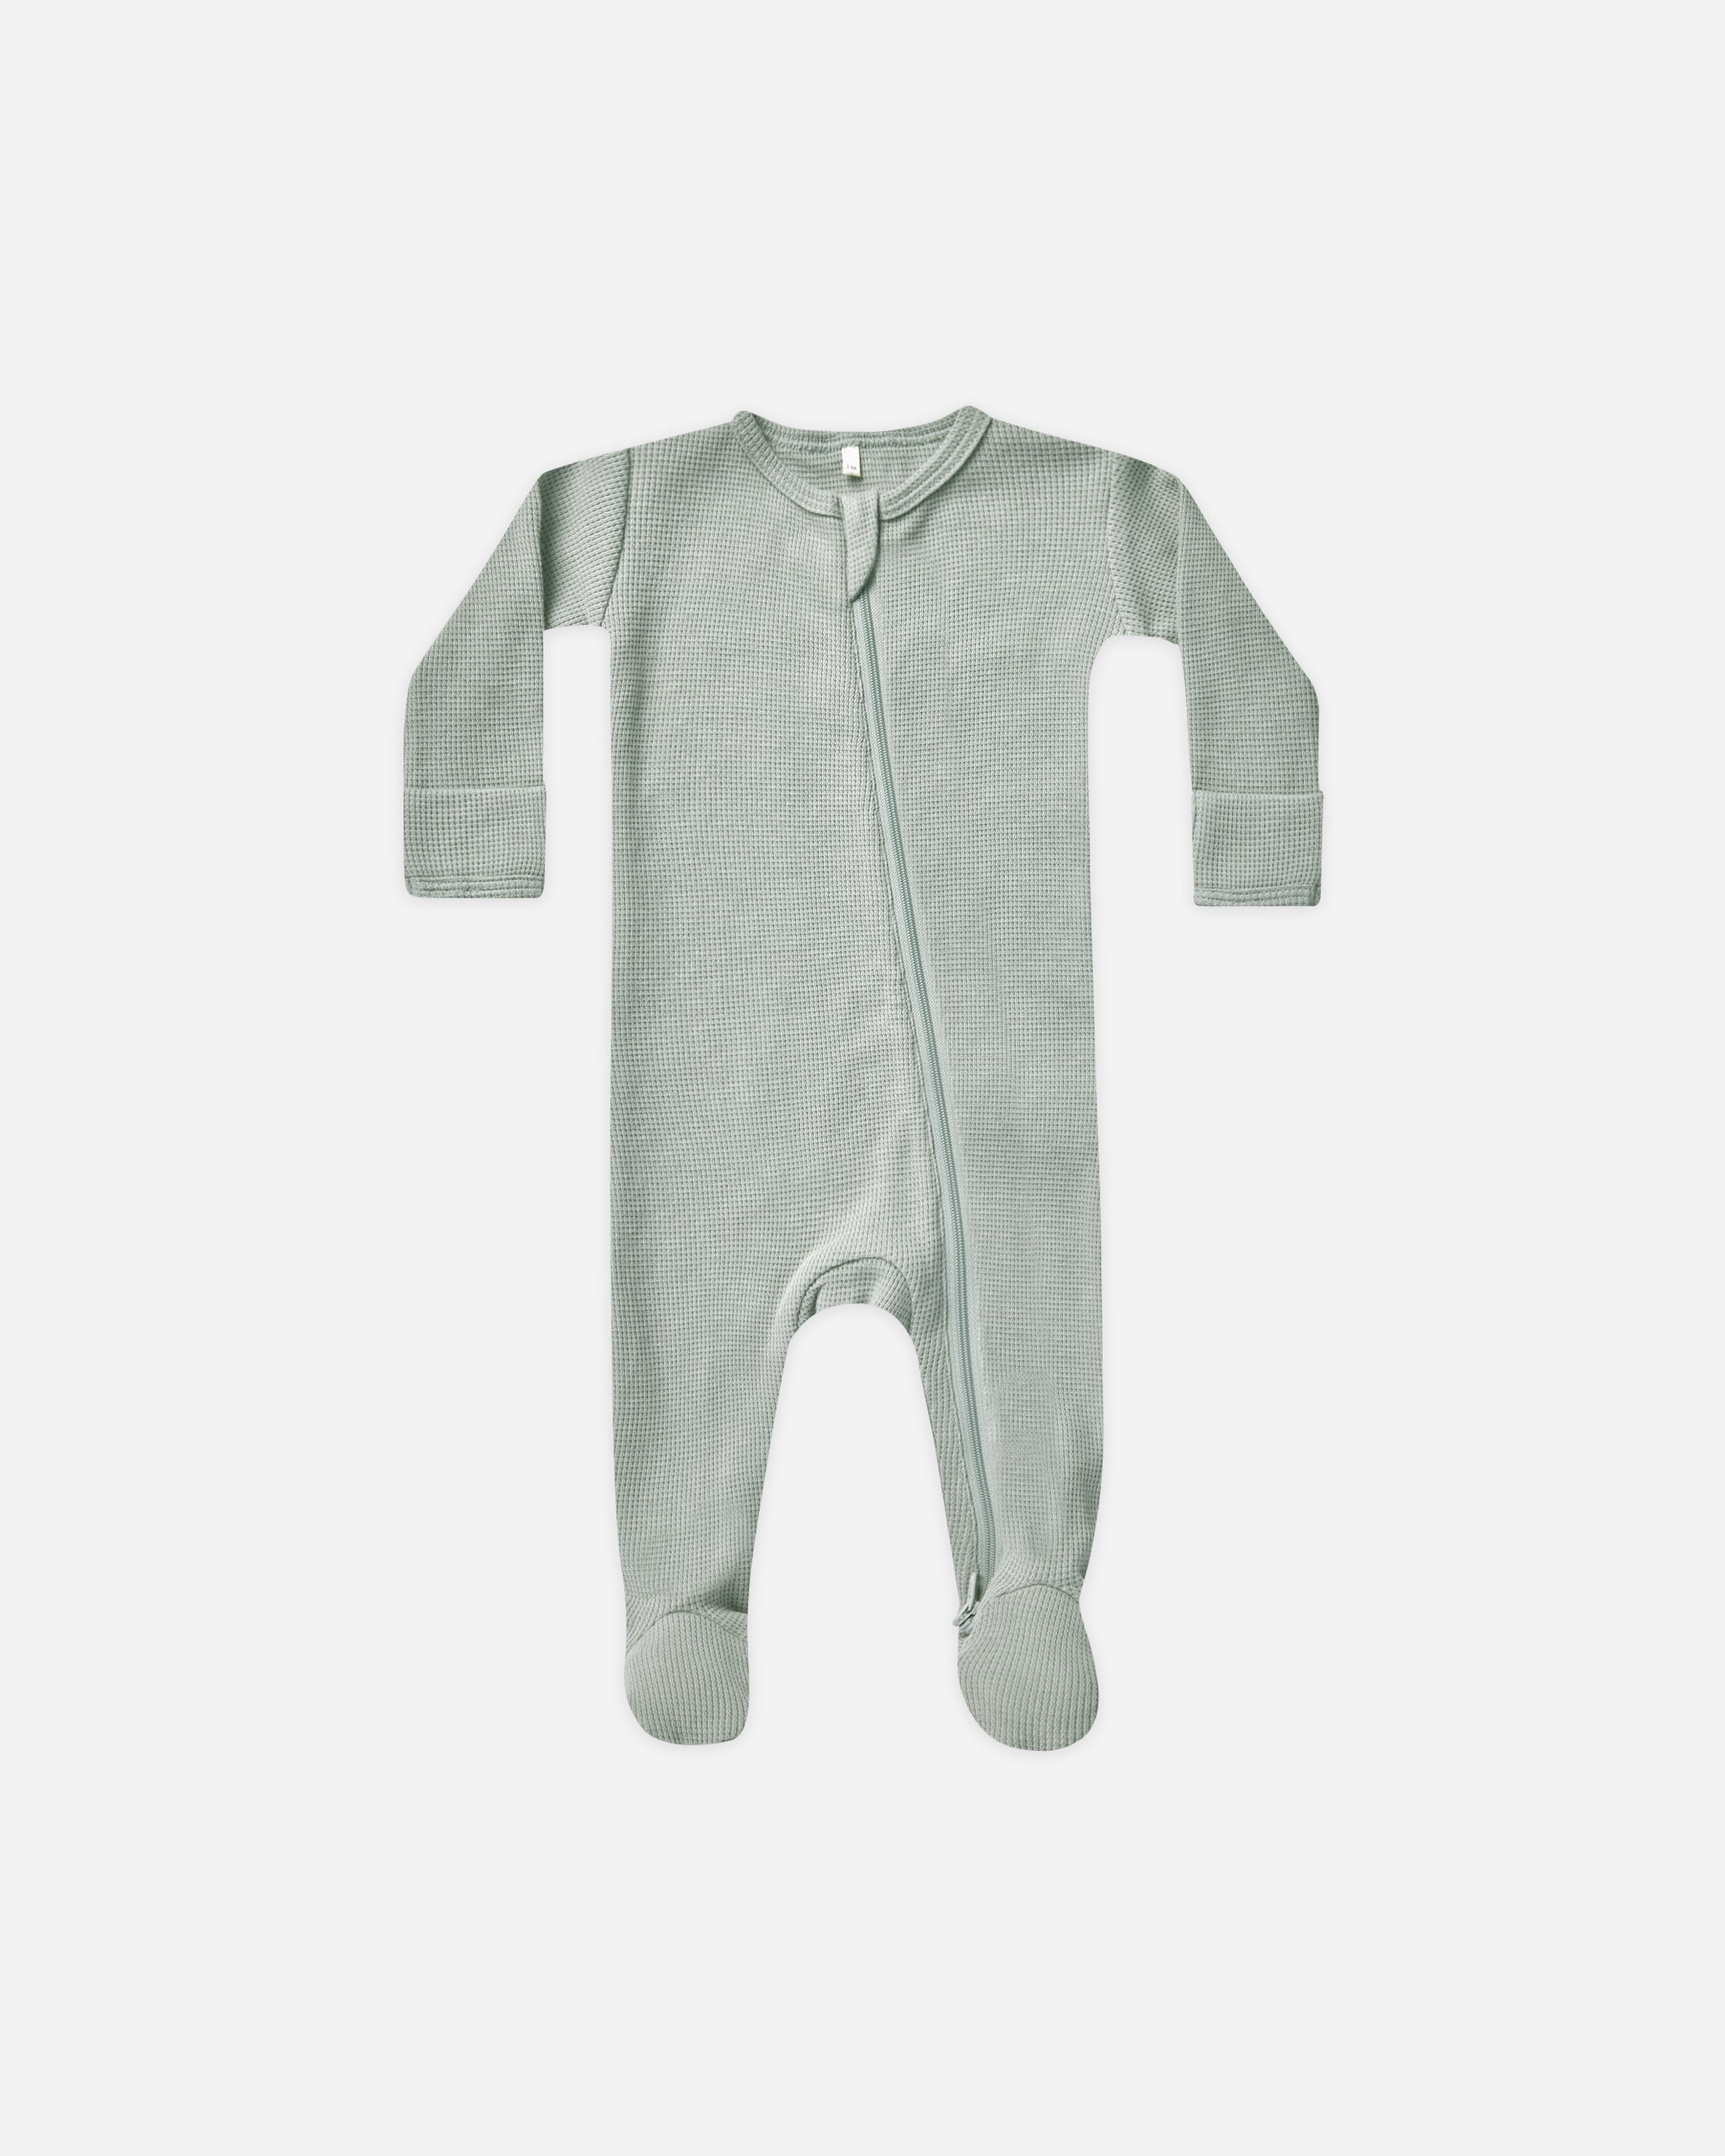 Waffle Zip Footie || Sky - Rylee + Cru | Kids Clothes | Trendy Baby Clothes | Modern Infant Outfits |